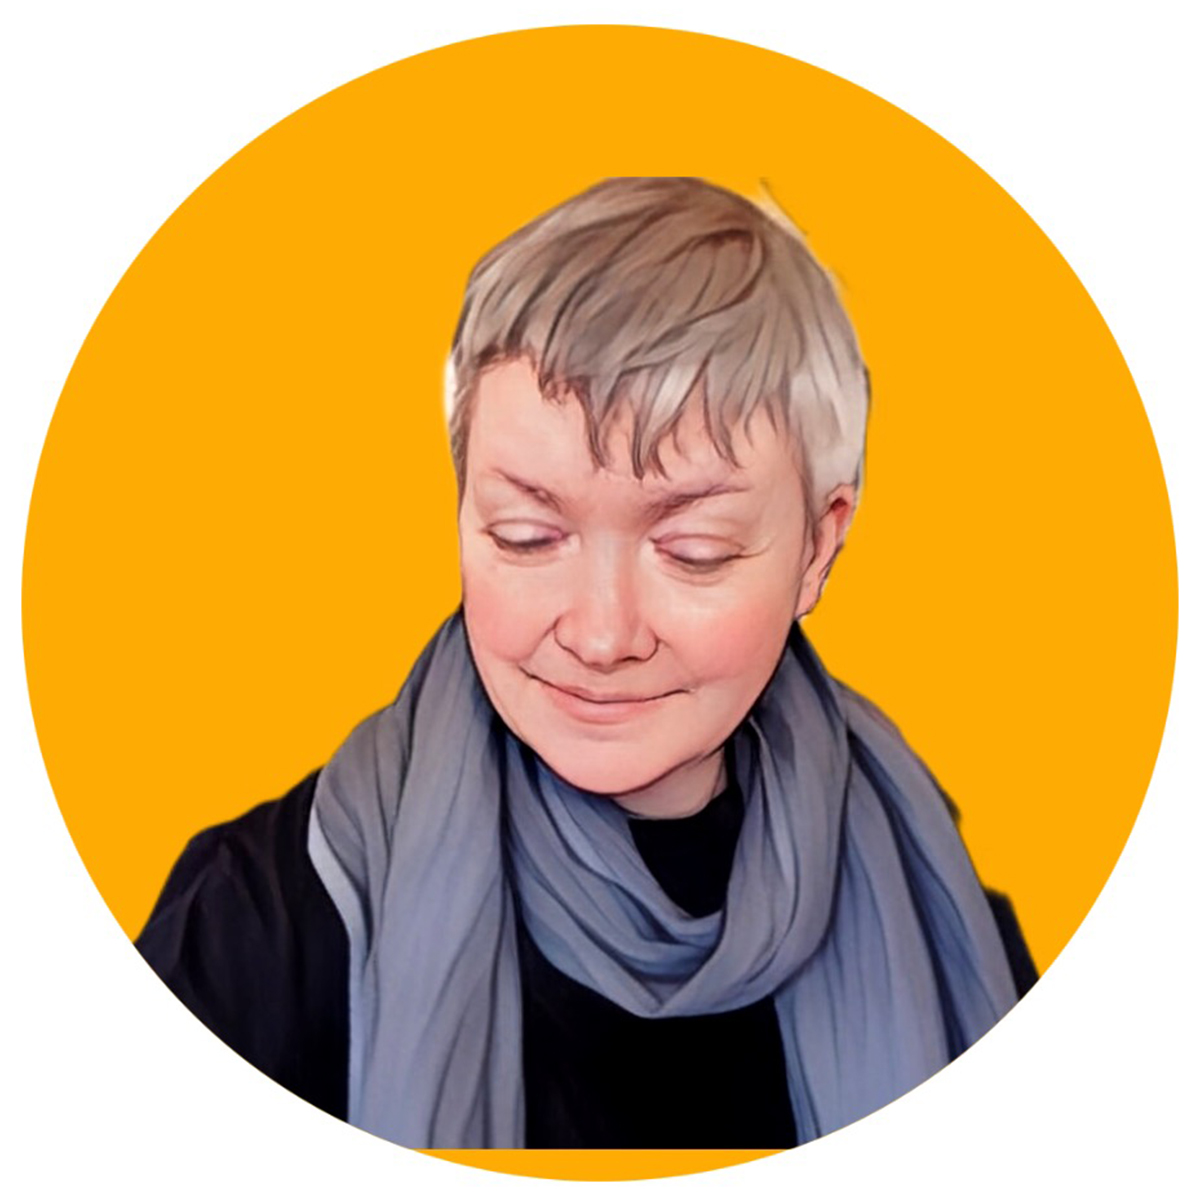 Rae Johnson color portrait. Rae is an white person, who is looking down slighting and wearing a gray scarf and dark-colored top and is posed against a bright yellow/mustard background.